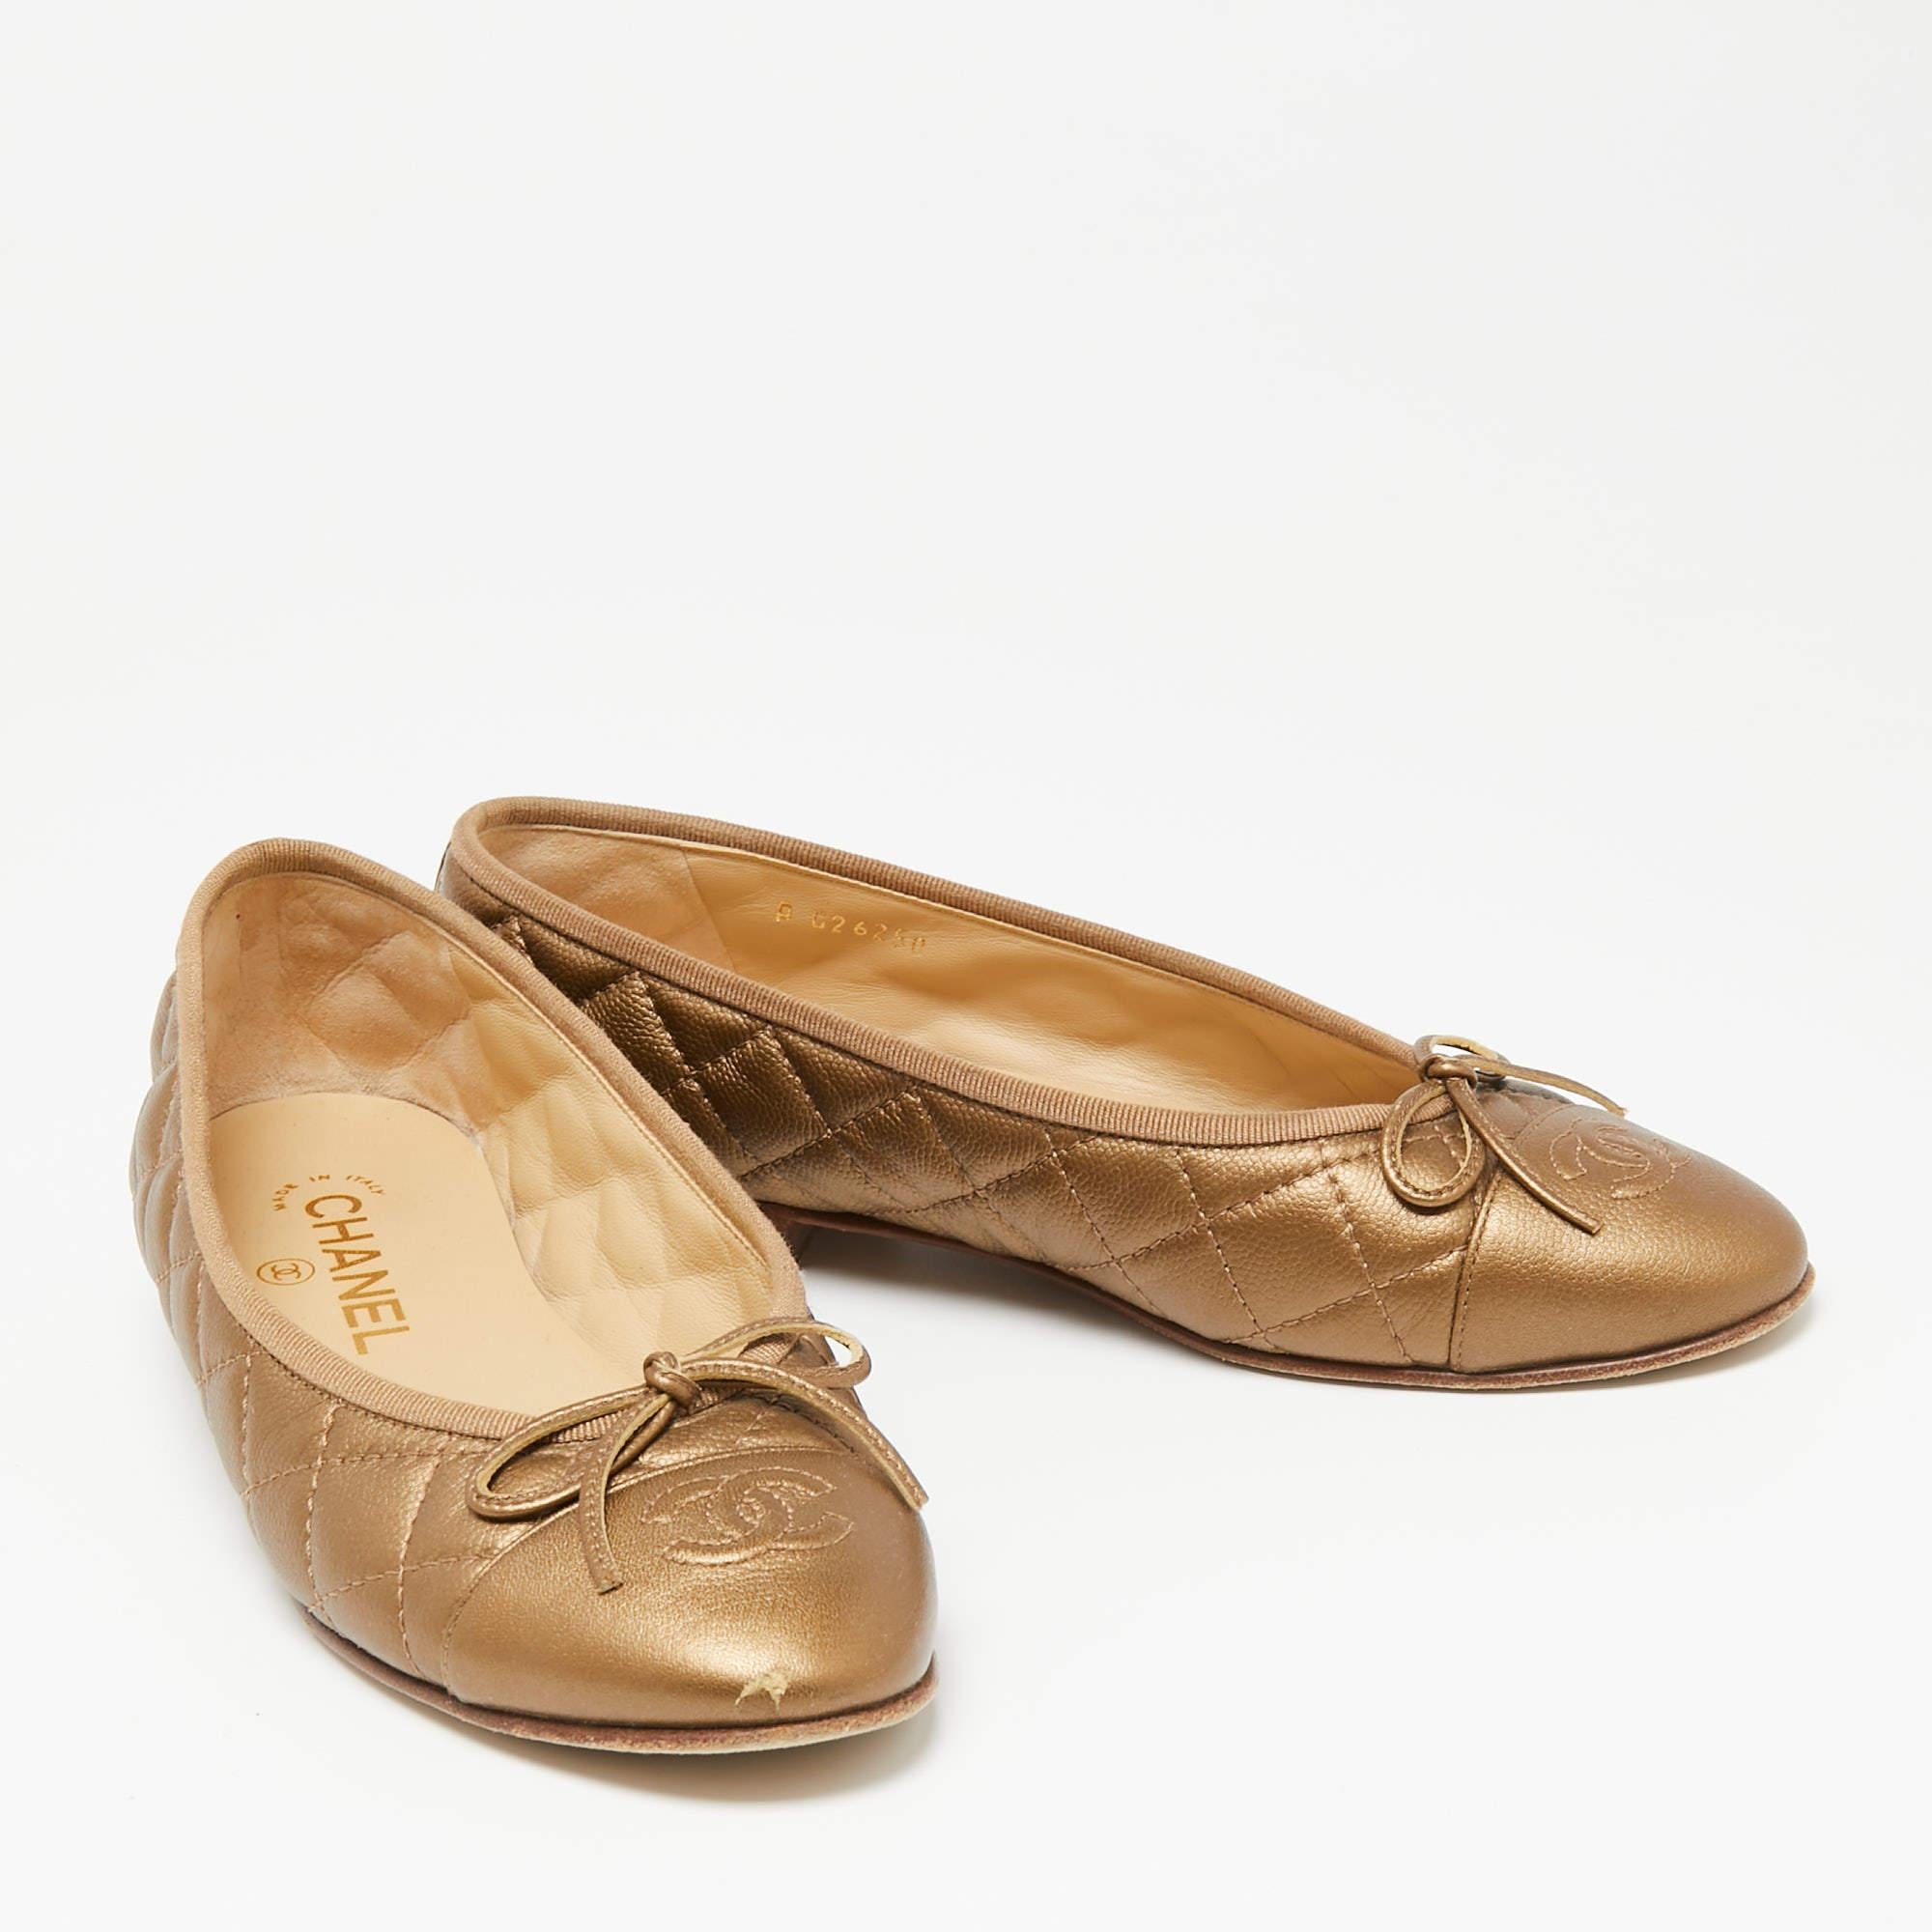 A common sight in the closets of fashionistas is a pair of Chanel ballet flats. They are perfect to wear on busy days and just stylish enough to assist one's style. These are crafted from quilted leather and feature little bows and the CC logo on